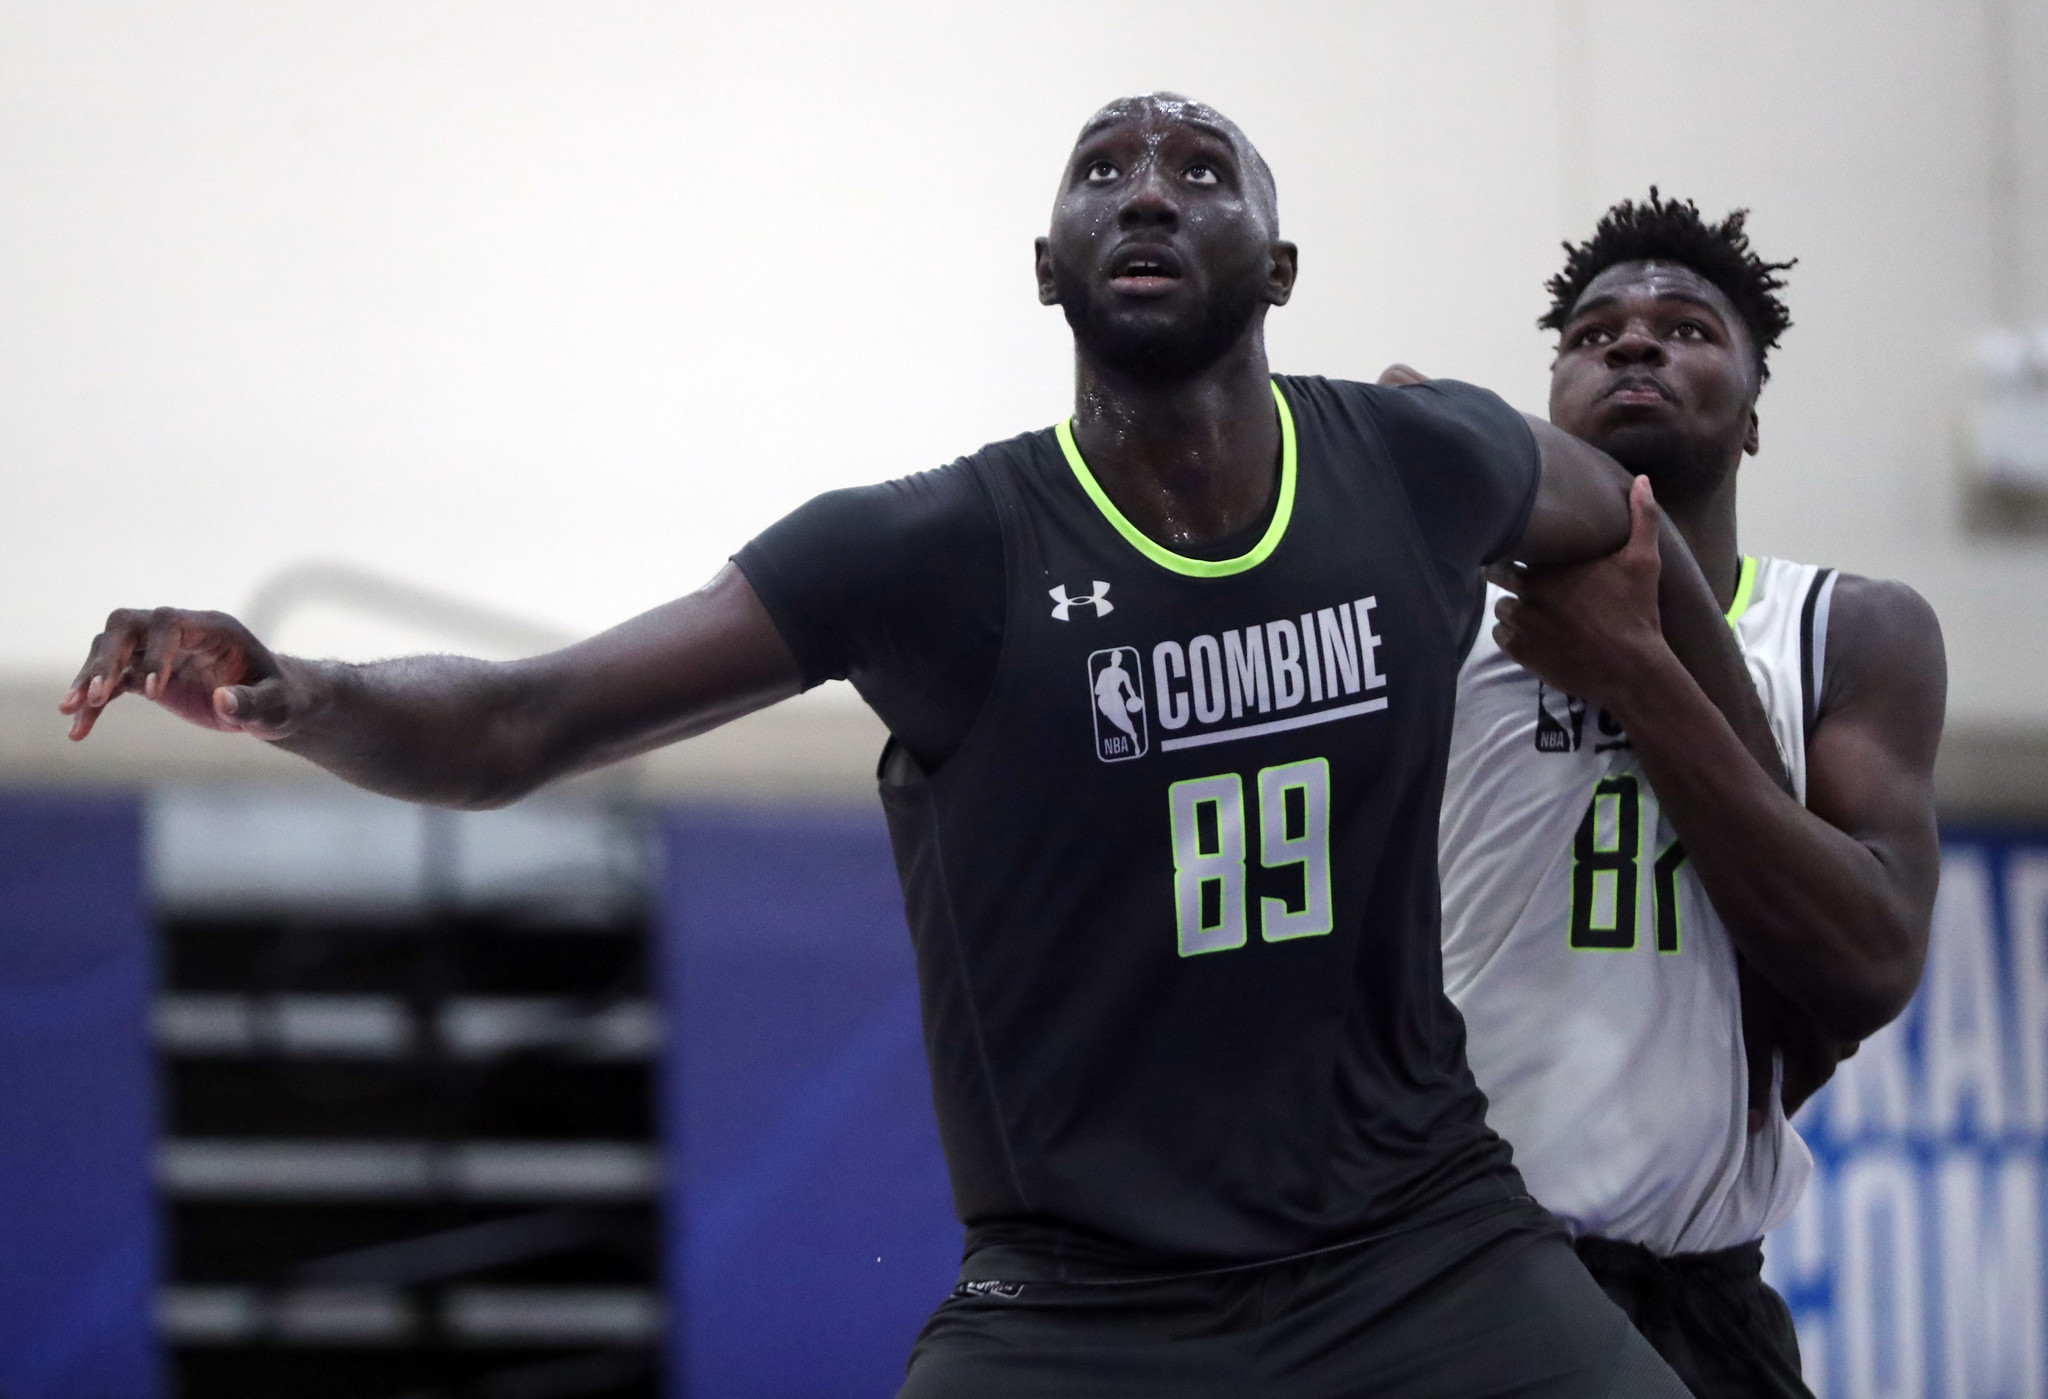 How tall is Tacko Fall? UCF star breaks NBA combine measurement records